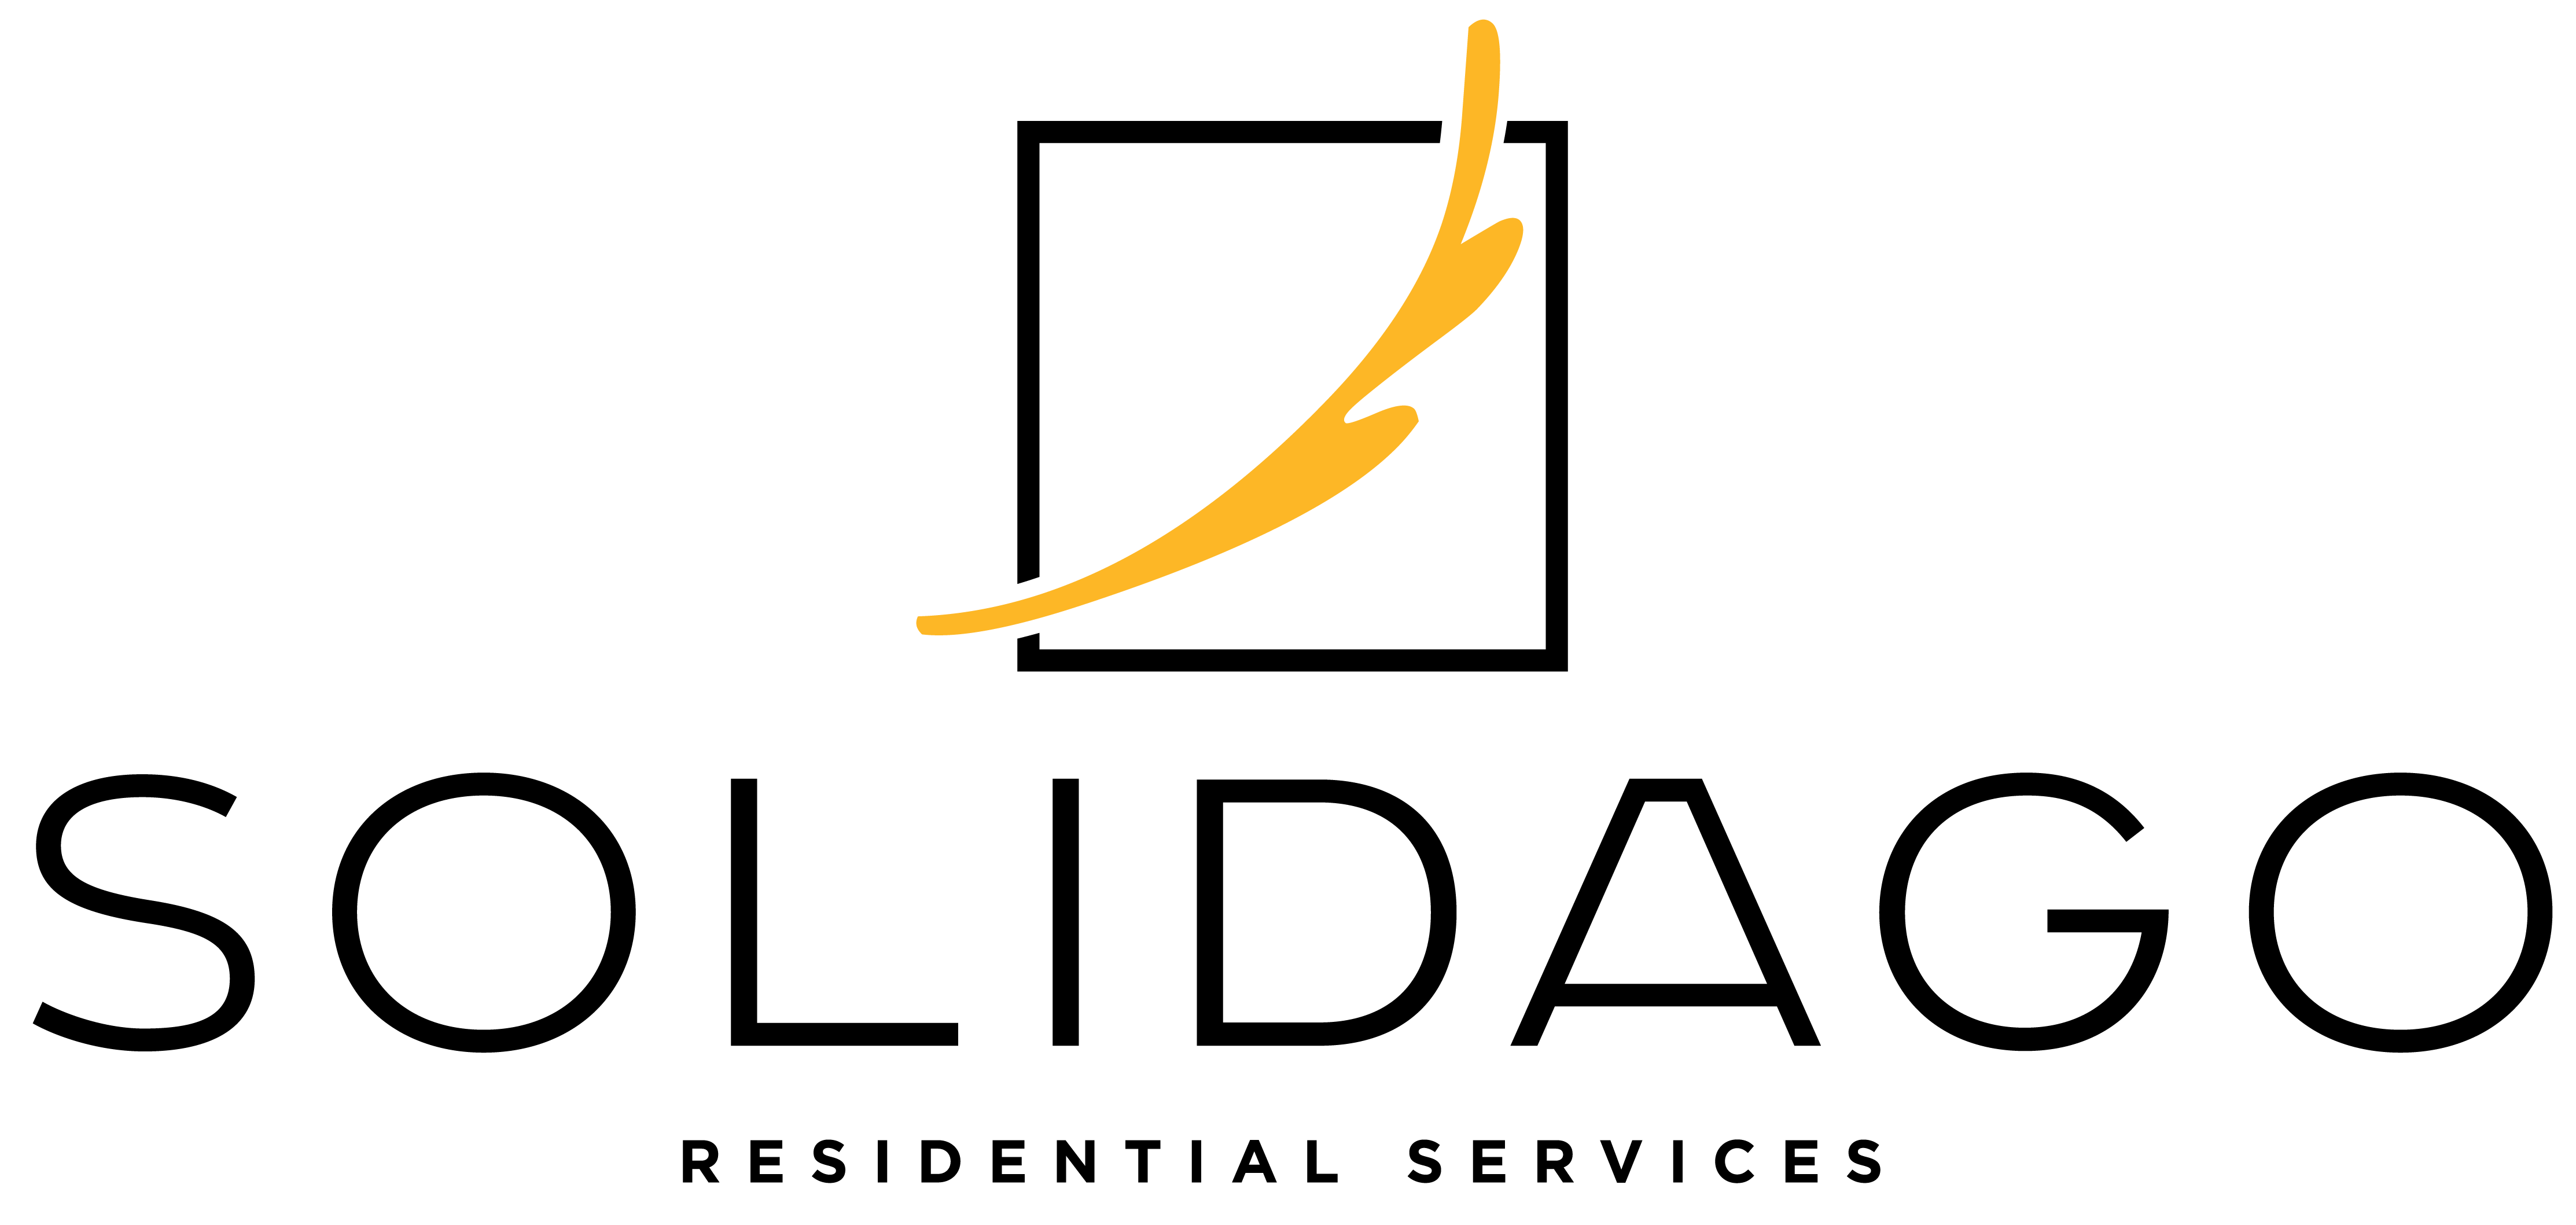 Solidago Residential Services colorful logo